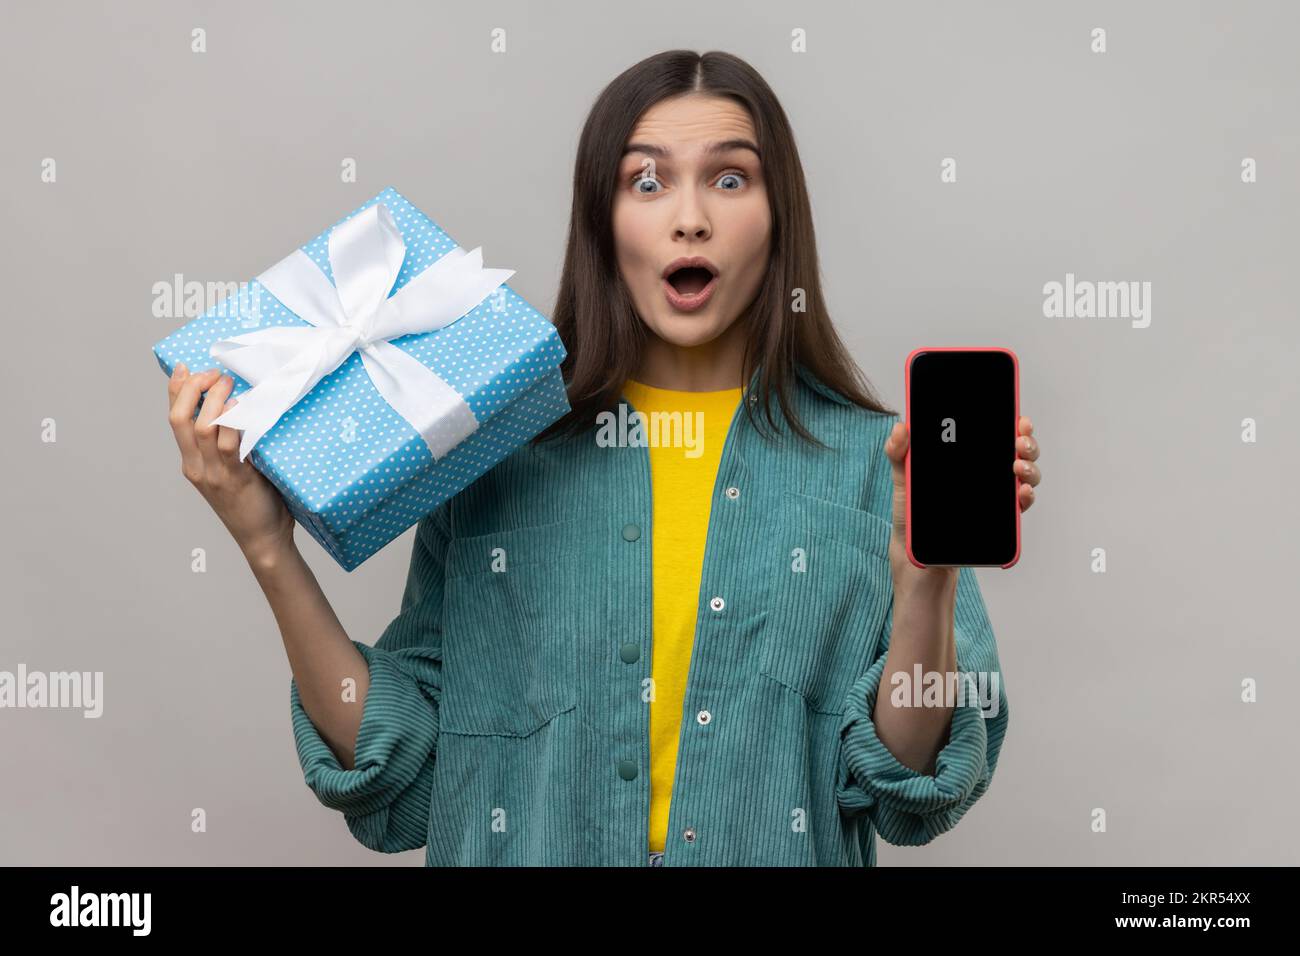 Astonished woman holding gift box and cell phone with empty display for online shopping advertising, expressing shock, wearing casual style jacket. Indoor studio shot isolated on gray background. Stock Photo